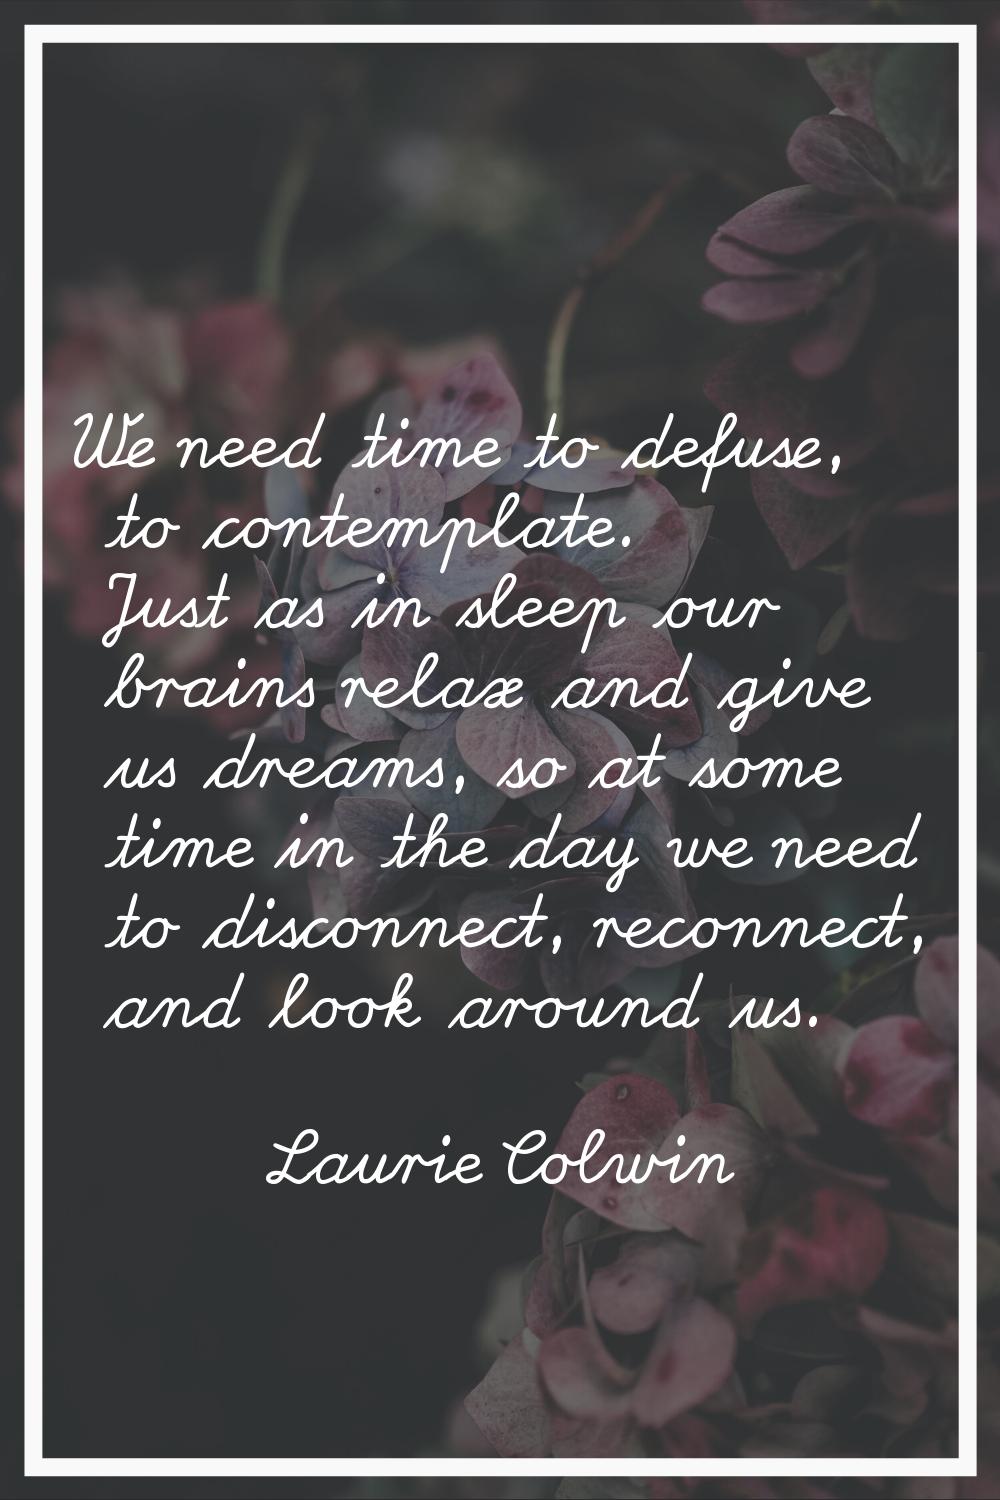 We need time to defuse, to contemplate. Just as in sleep our brains relax and give us dreams, so at